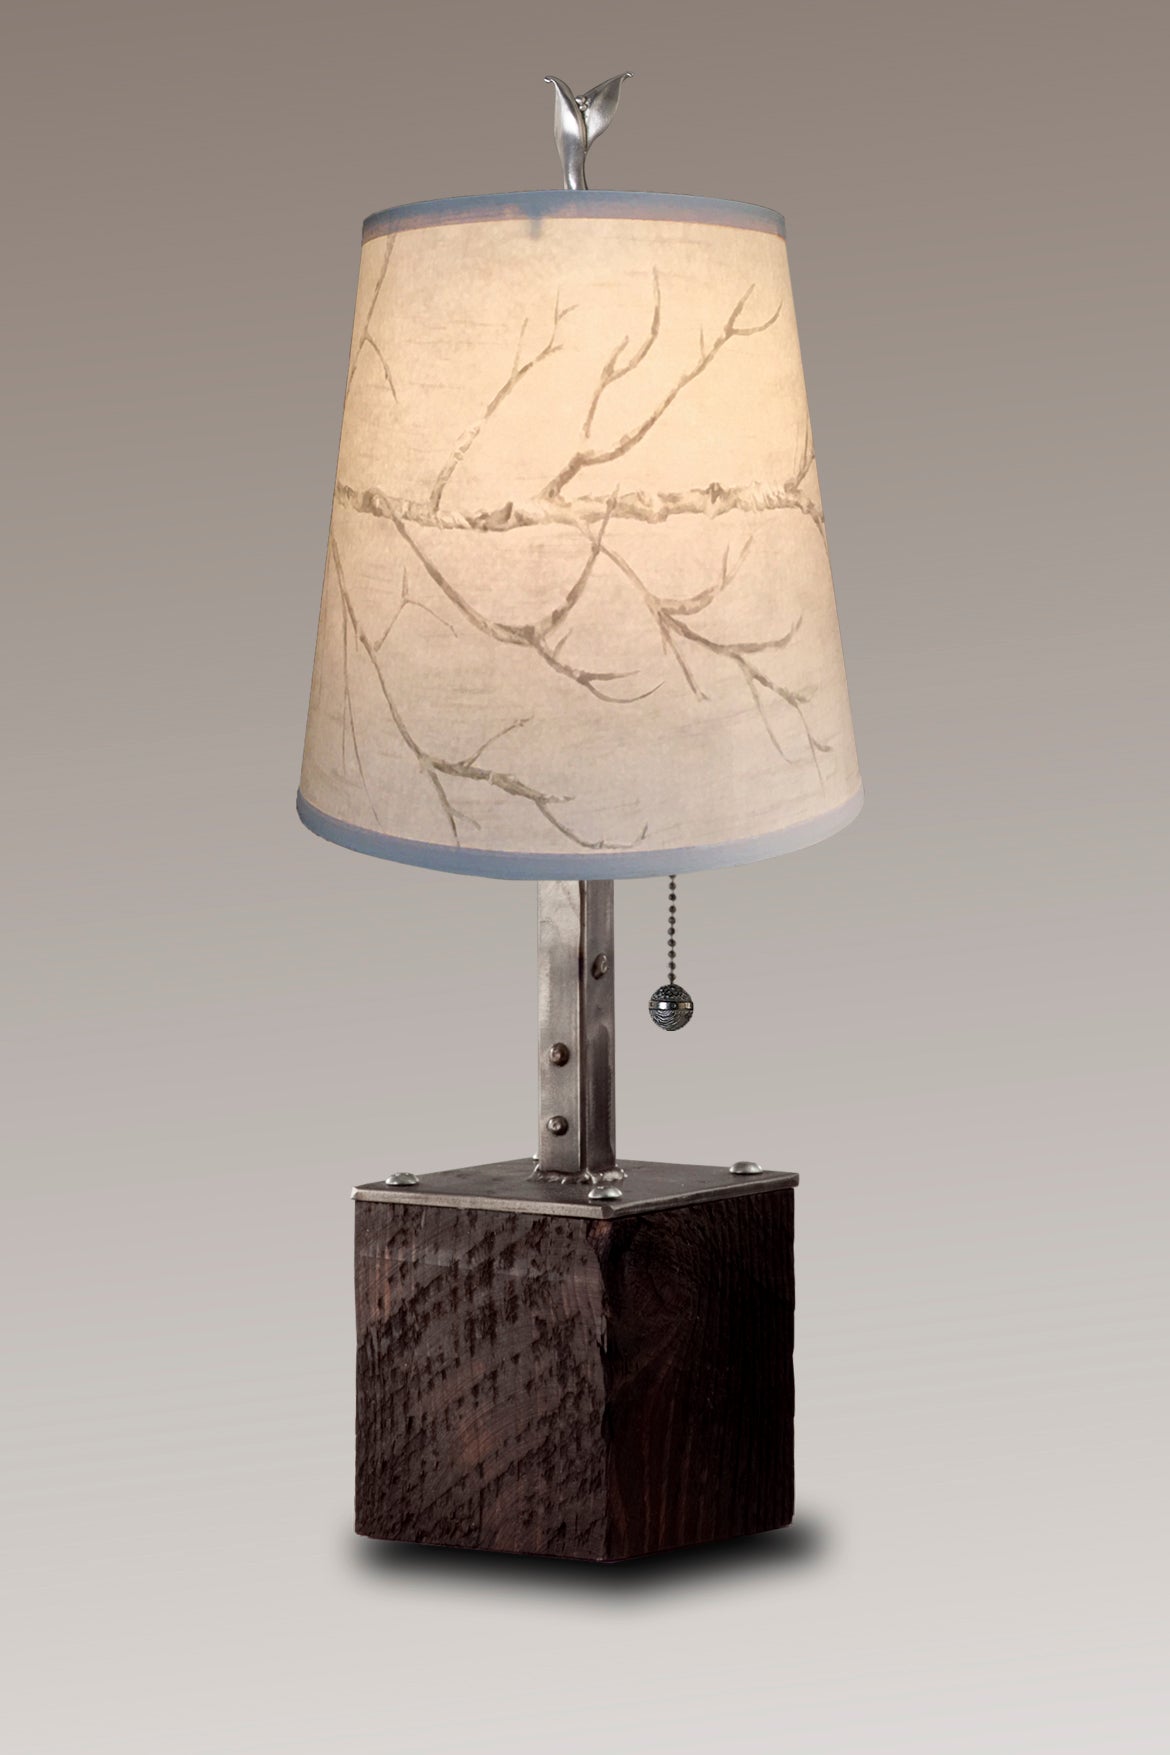 Janna Ugone &amp; Co Table Lamps Steel Table Lamp on Reclaimed Wood with Small Drum Shade in Sweeping Branch